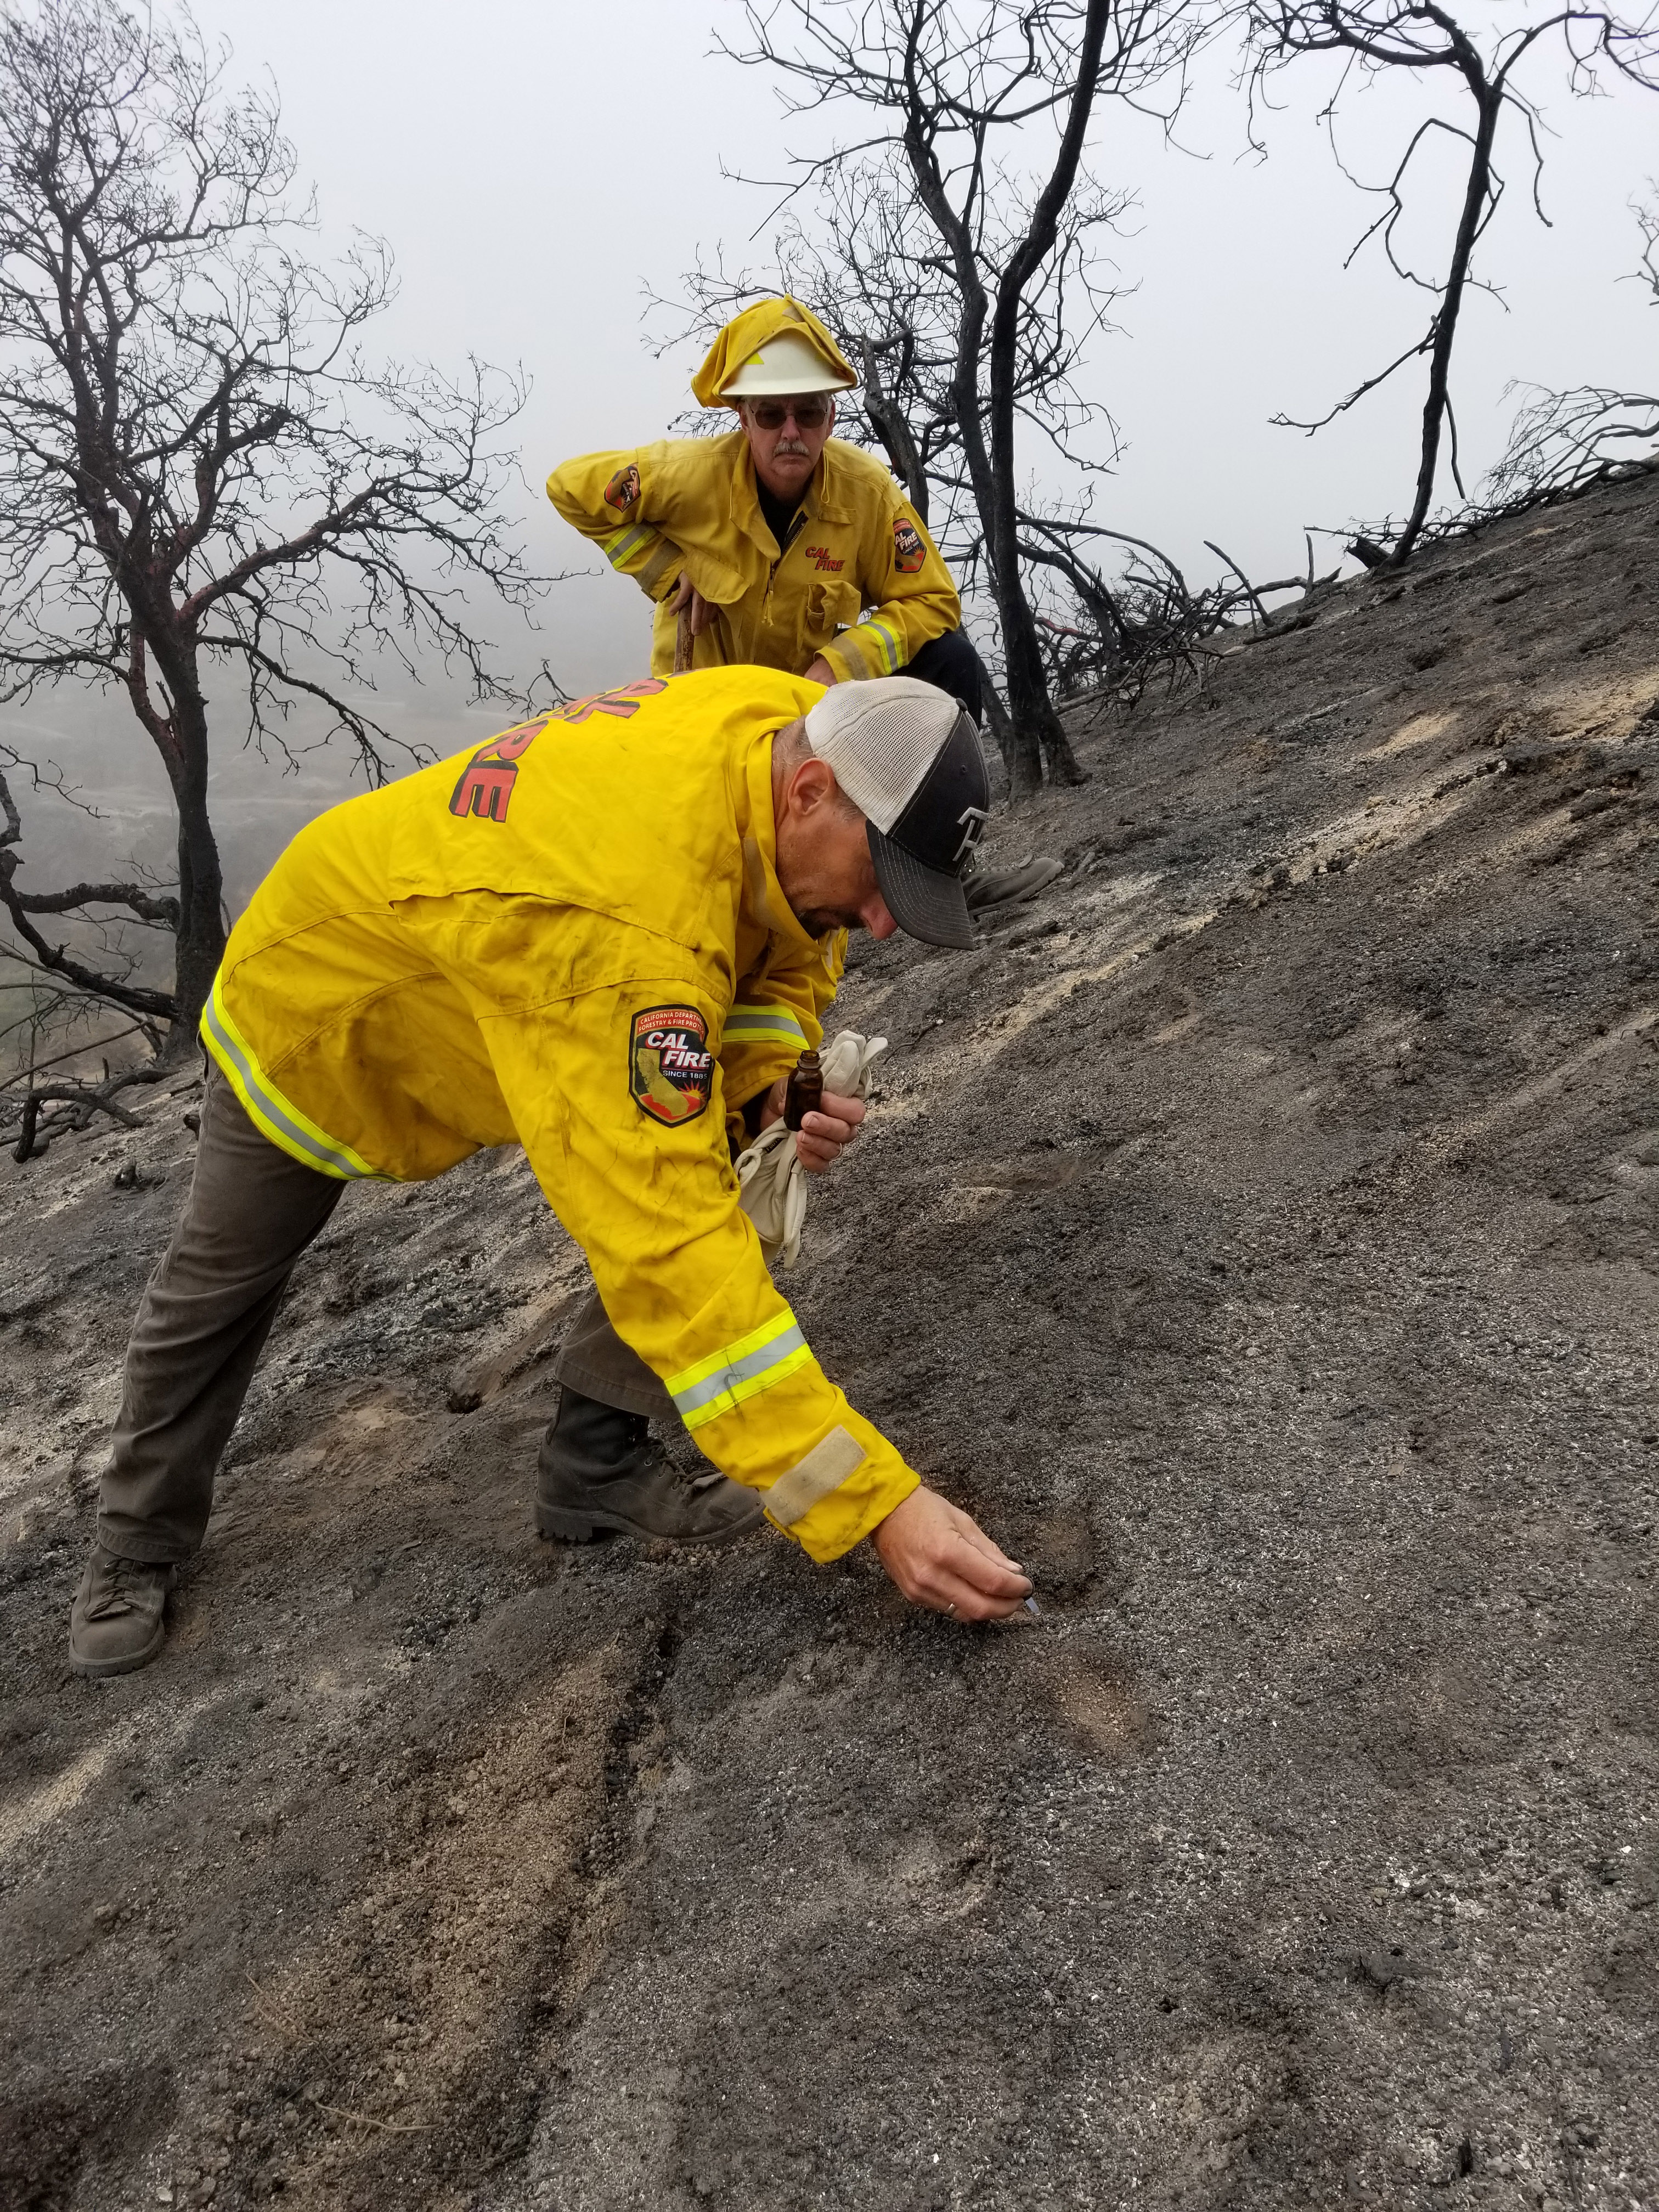 Two individuals on a charred hillside. One of the individuals is reaching down to the ground while the other observes.